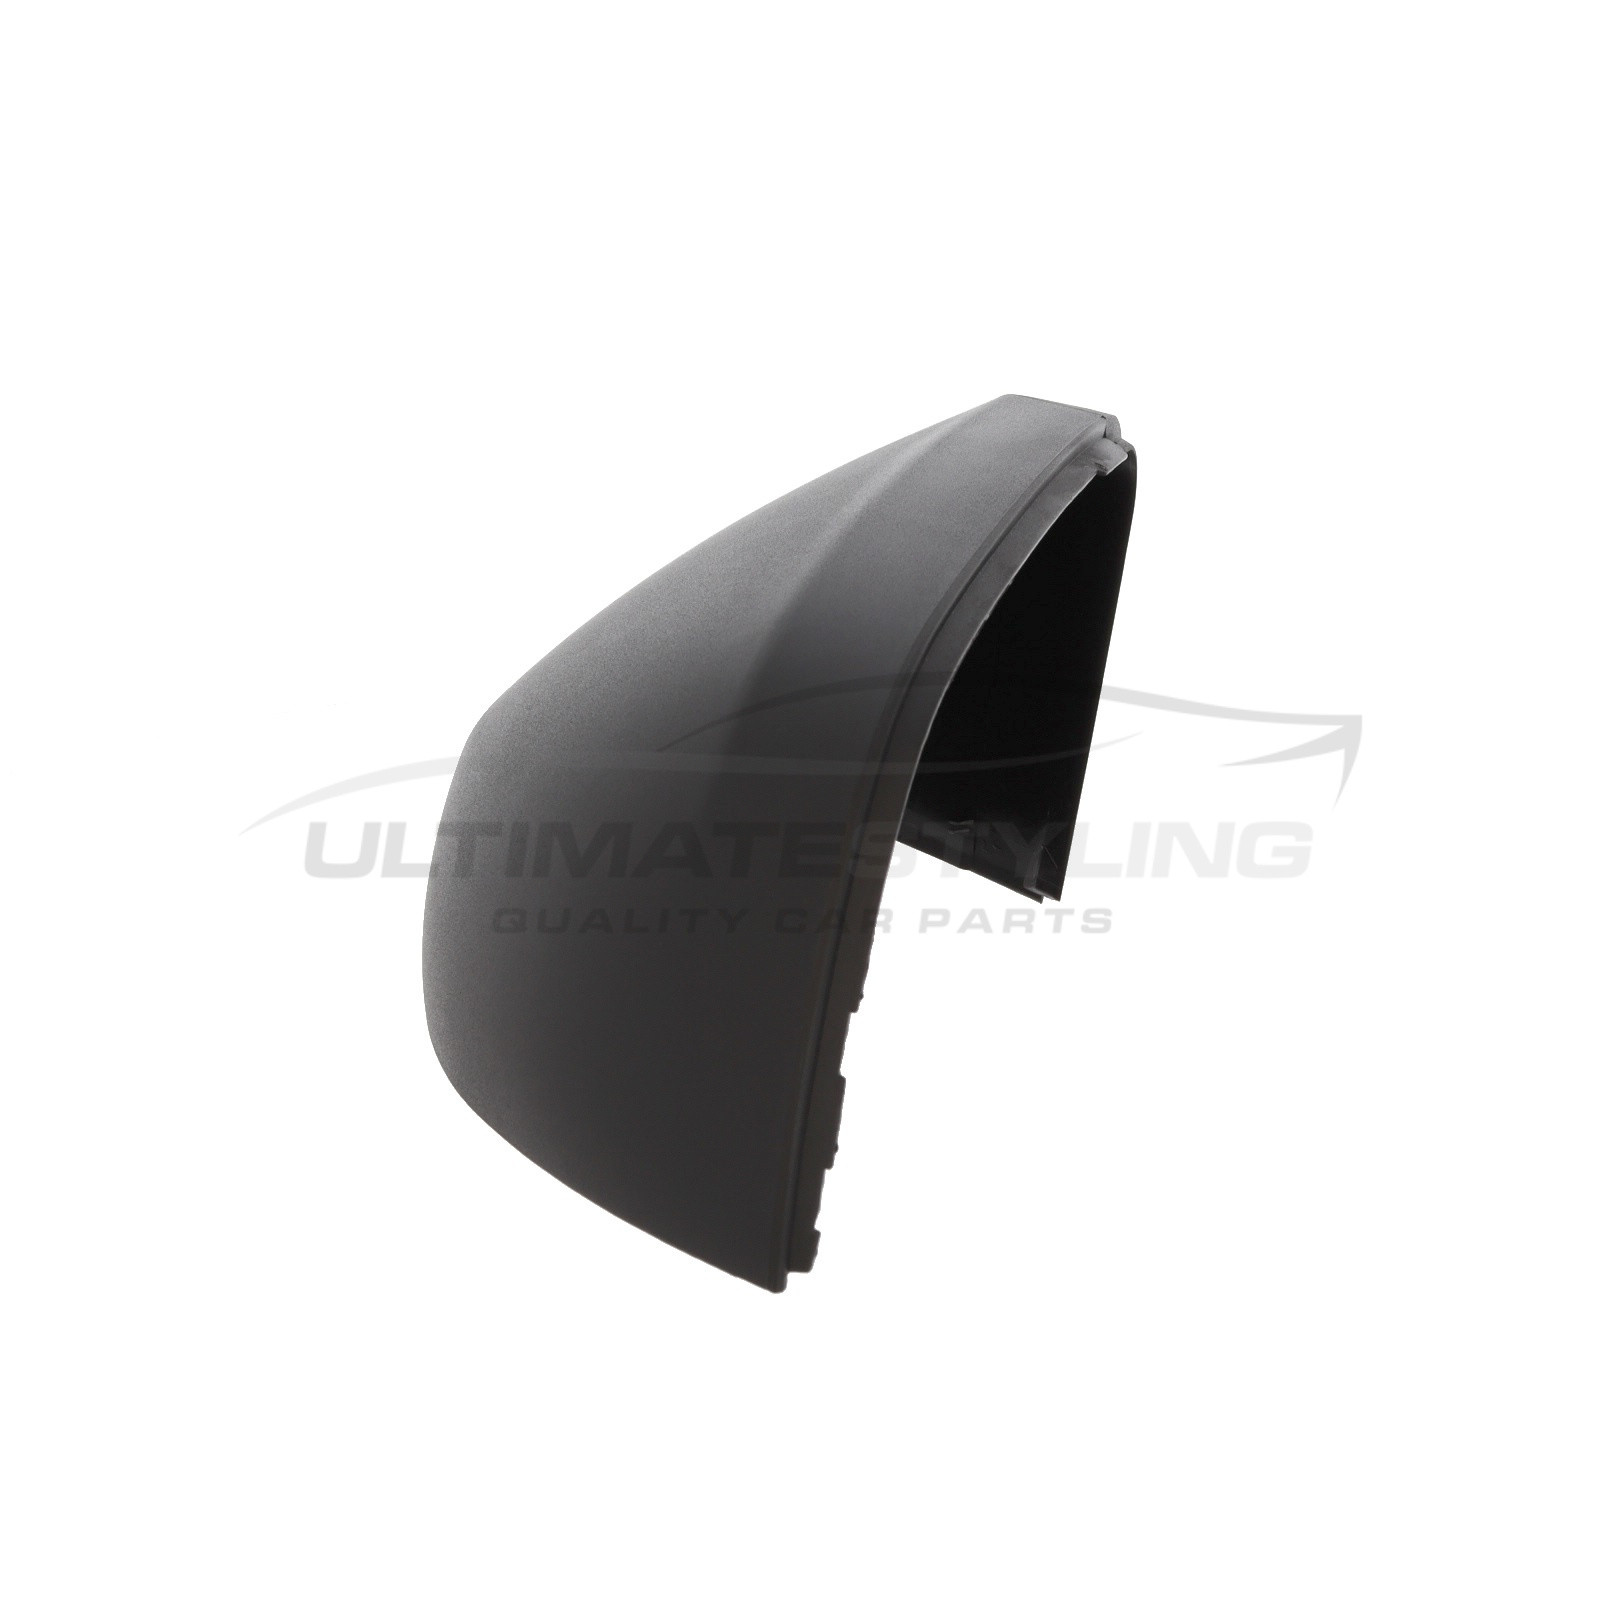 Mercedes Benz Vito Wing Mirror Cover - Passenger Side (LH) - Black -  Textured